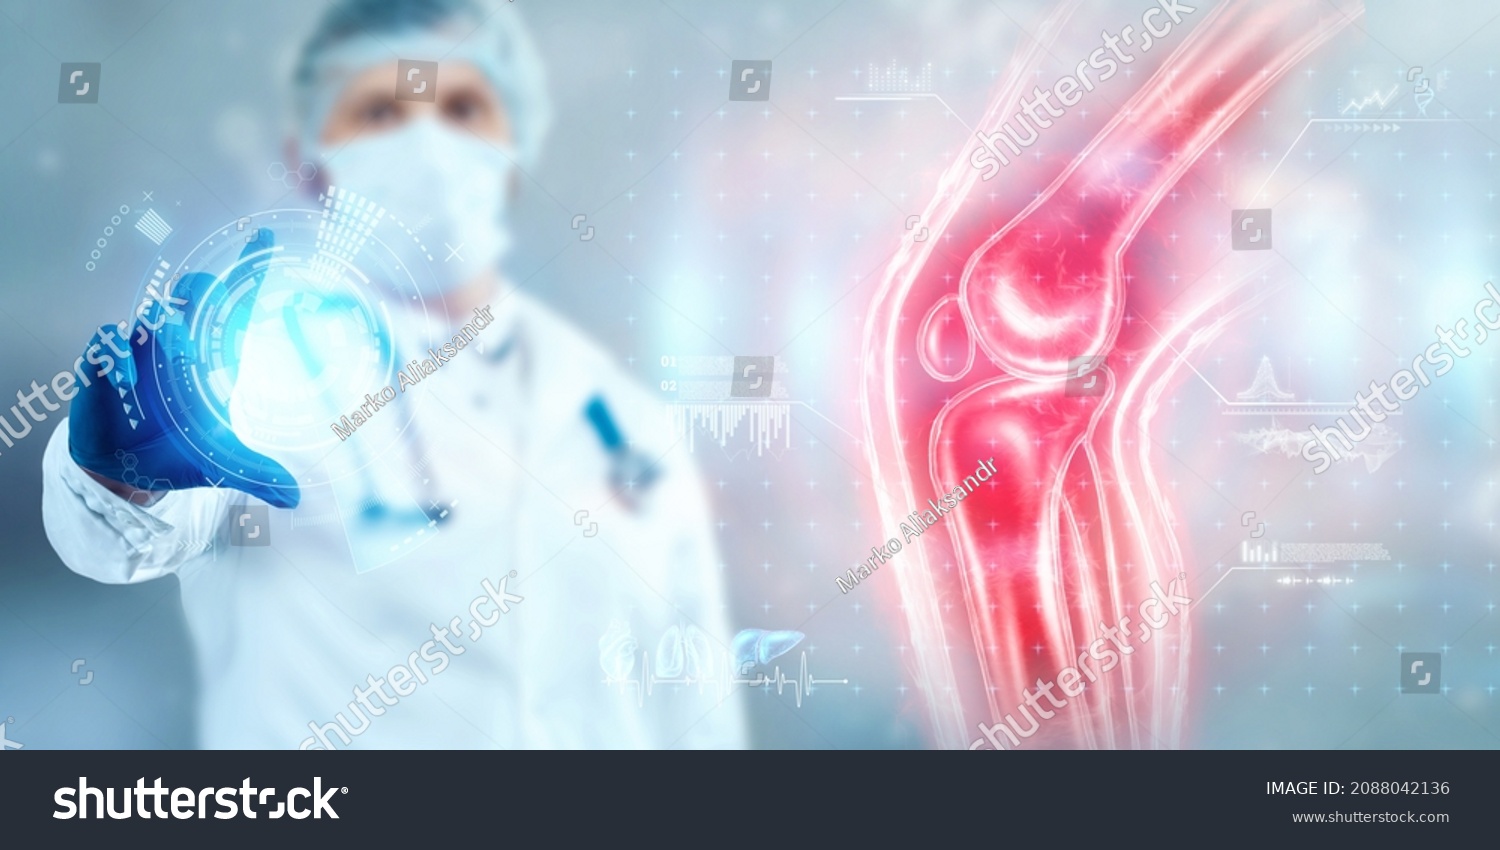 The doctor looks at a hologram of a sore knee, severe pain. X-ray image, trauma, rheumatologist consultation, skeletal image, medical concept, medical technologies of the future, pain when walking #2088042136